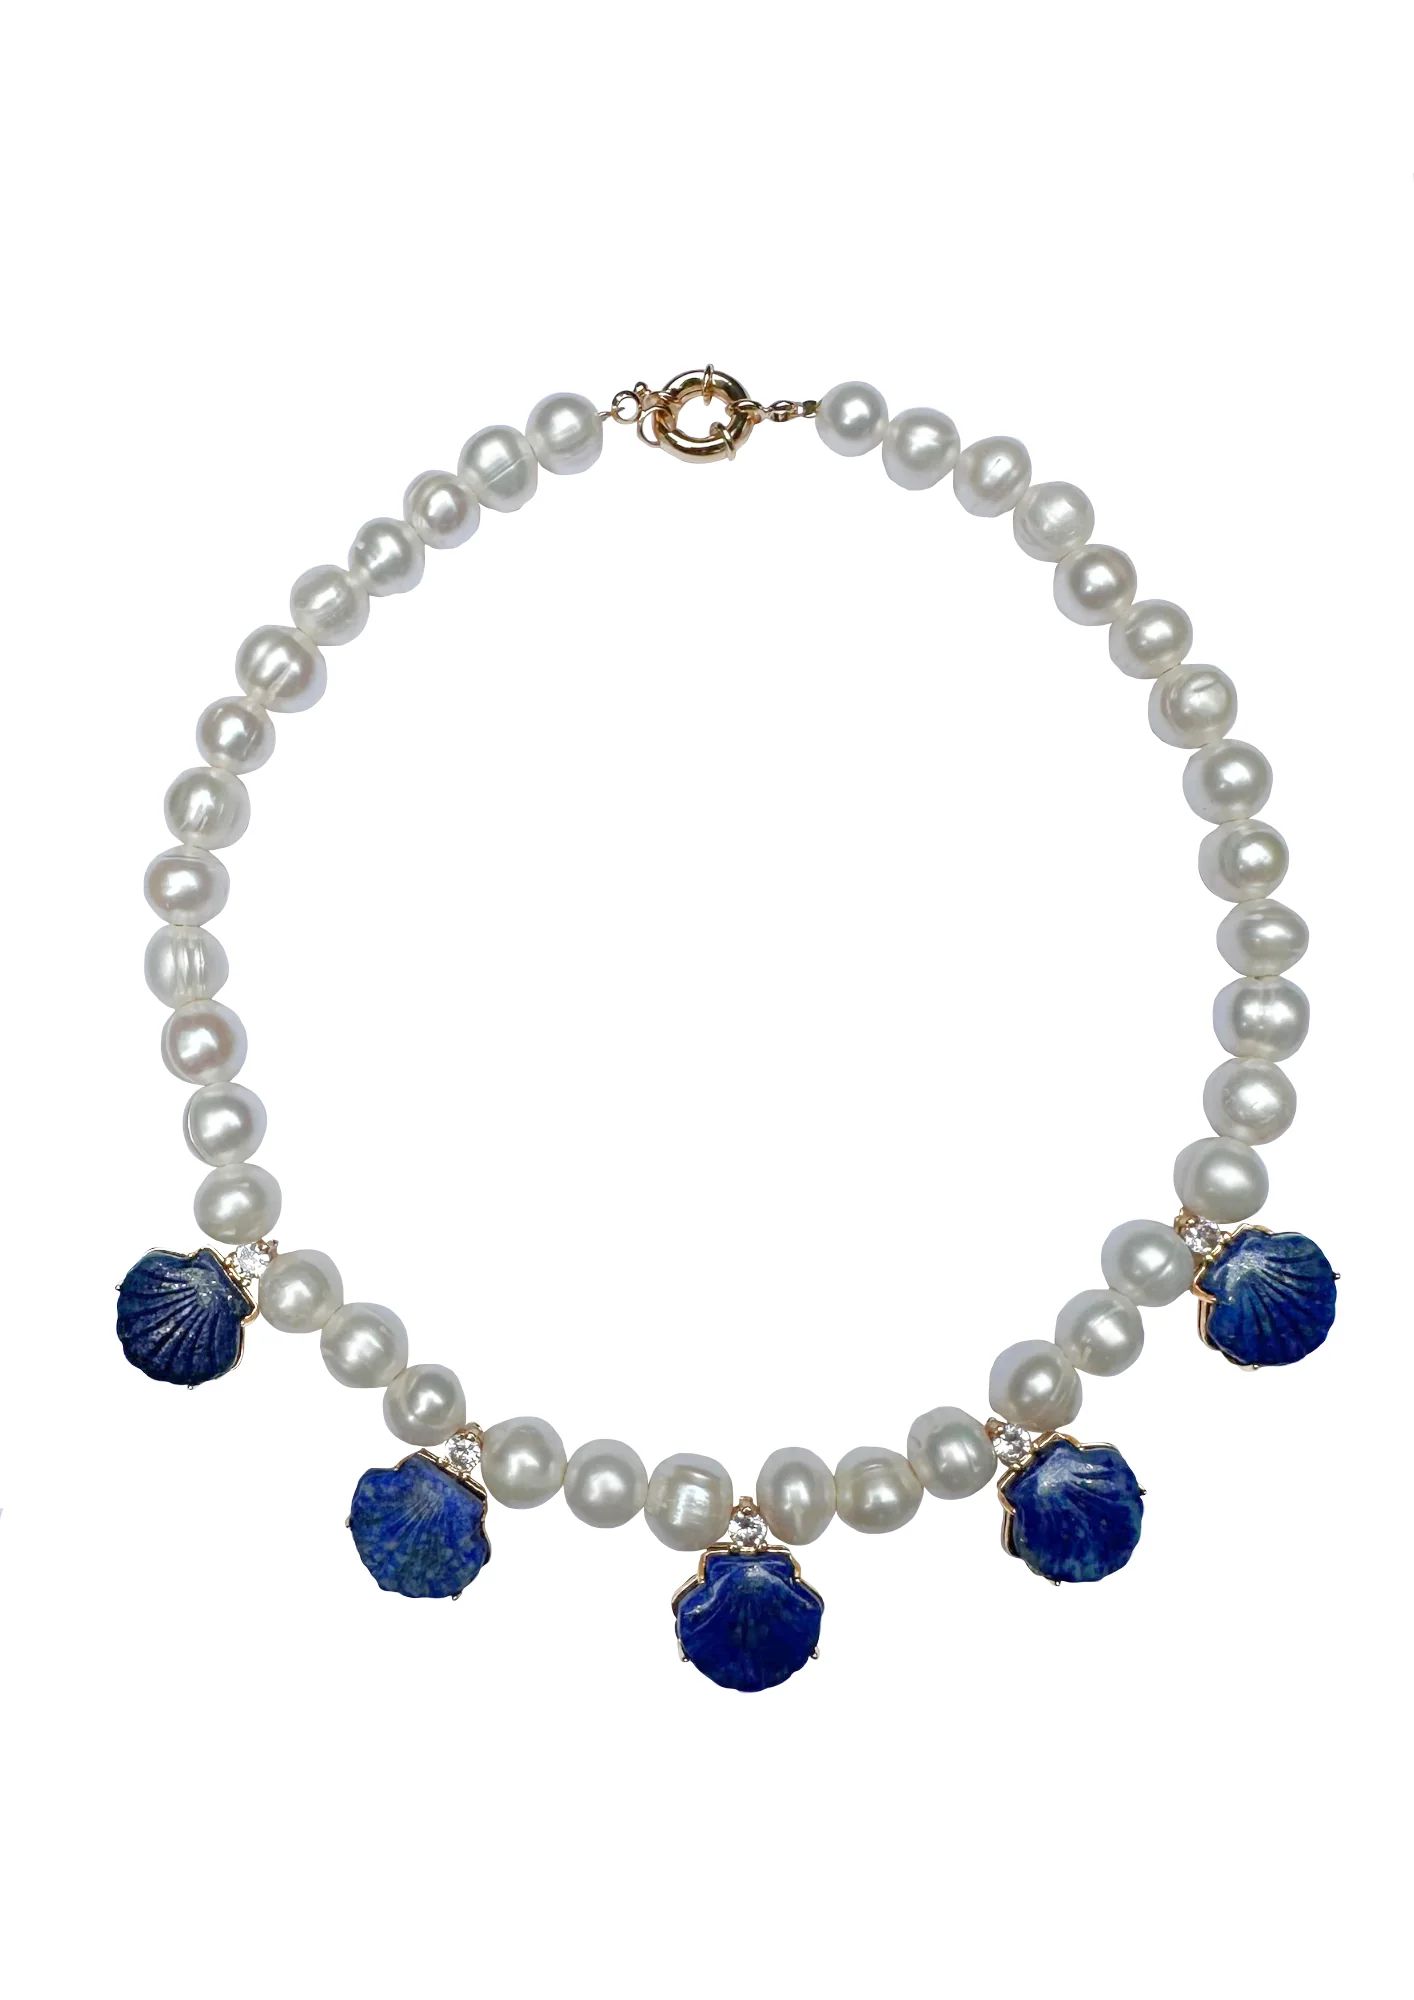 Limited Edition: Freshwater Pearl & Lapis Blue Seashell Necklace | Nicola Bathie Jewelry